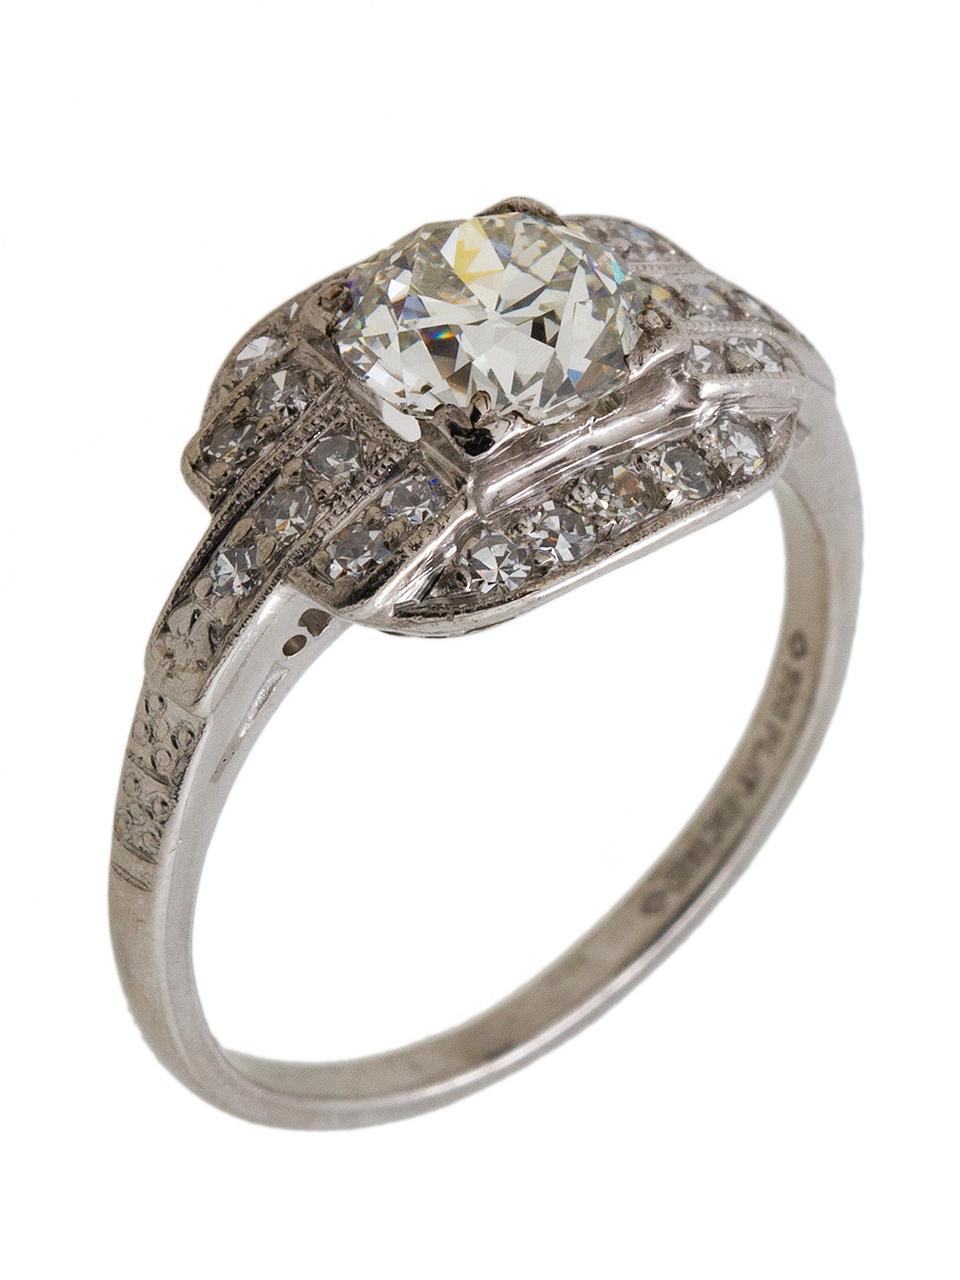 Striking Art Deco platinum engagement ring featuring an incredibly bright and well proportioned Old European Cut center diamond, weighing approximately .70ct, H-VS2. In addition to the center stone there are five rows of bead set single-cut side